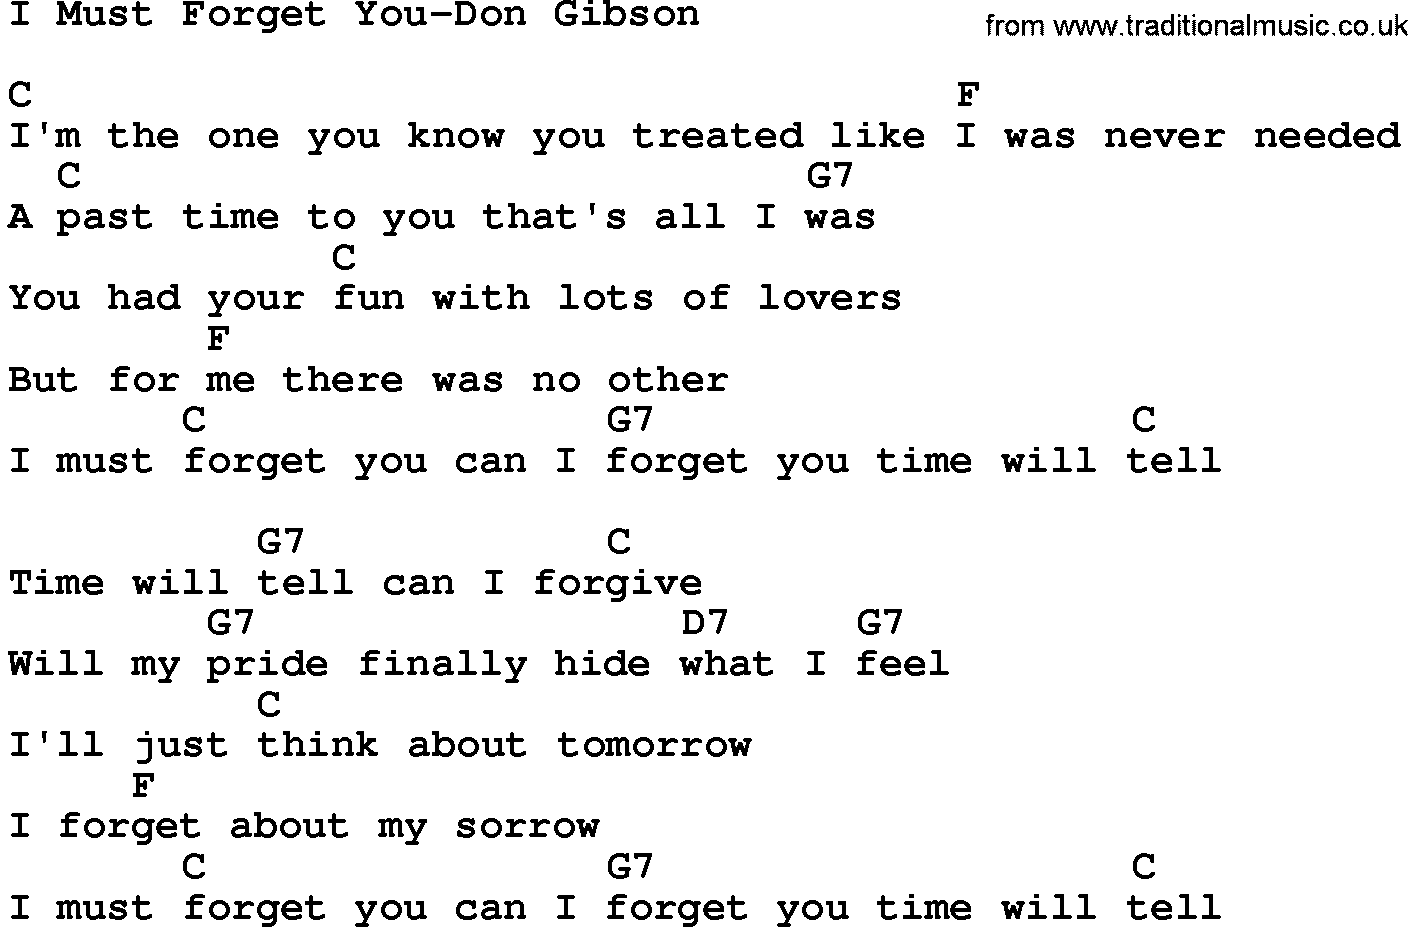 Country music song: I Must Forget You-Don Gibson lyrics and chords